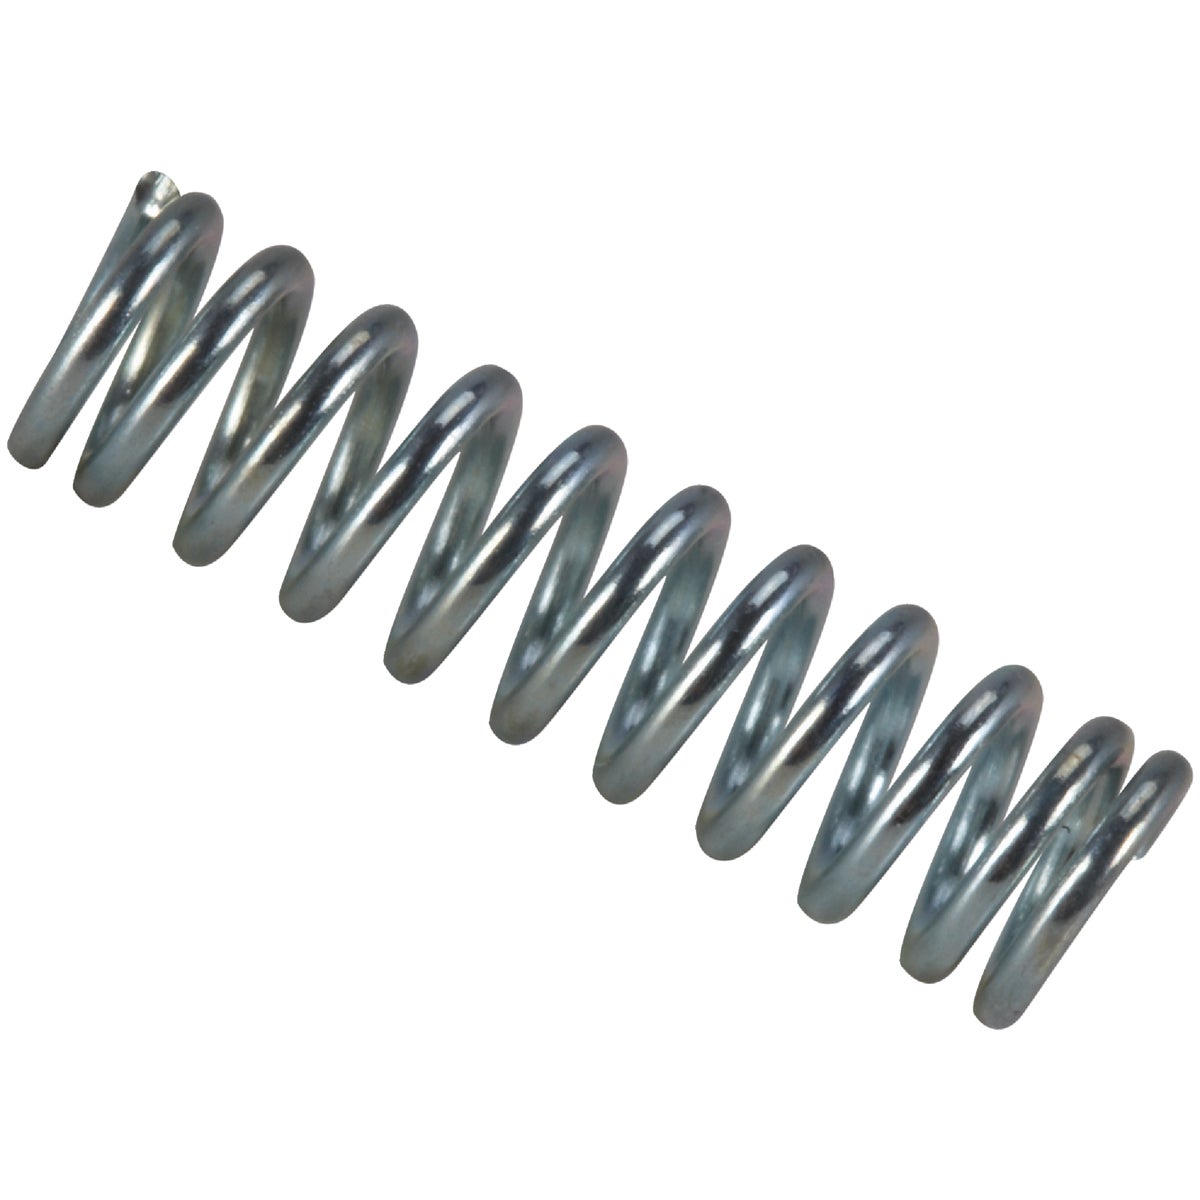 Century Spring 1-3/4 In. x 1/2 In. Compression Spring (2 Count)